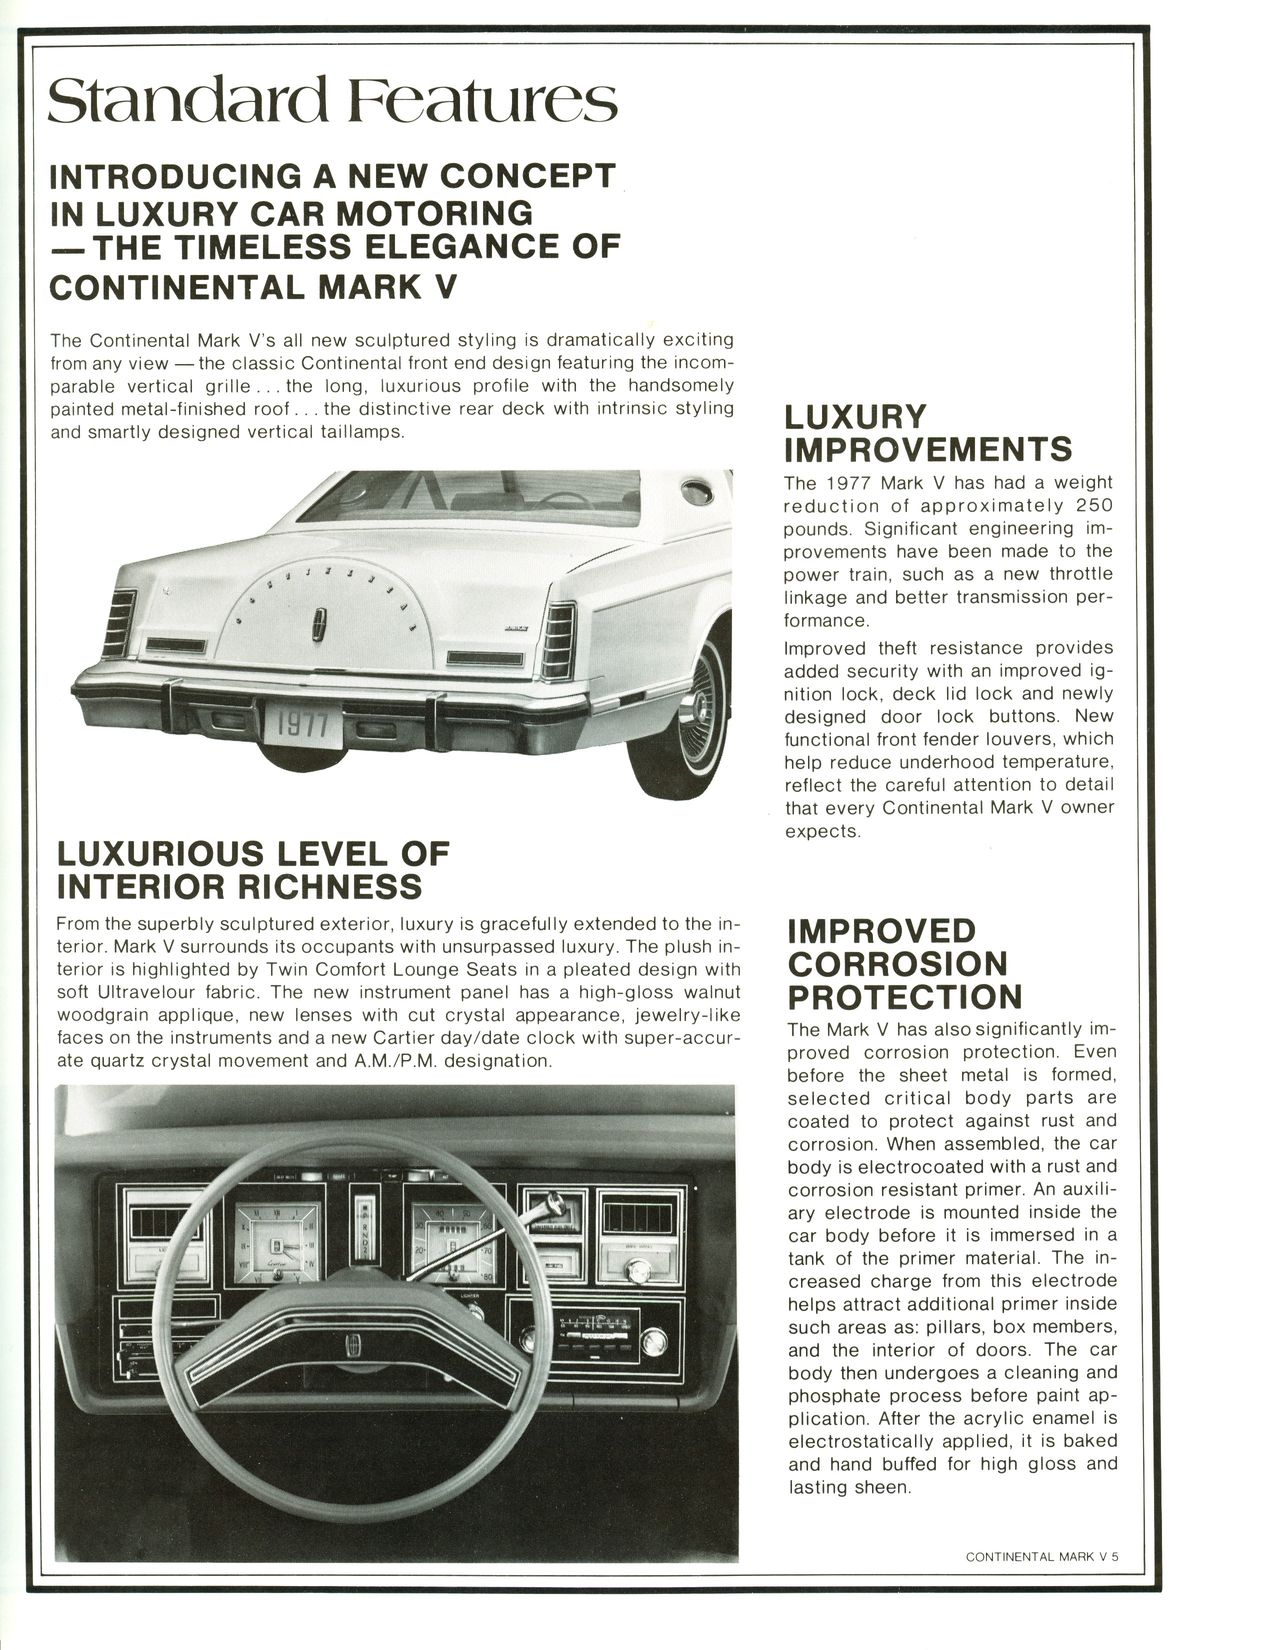 1977 Continental Product Facts Book-1-05